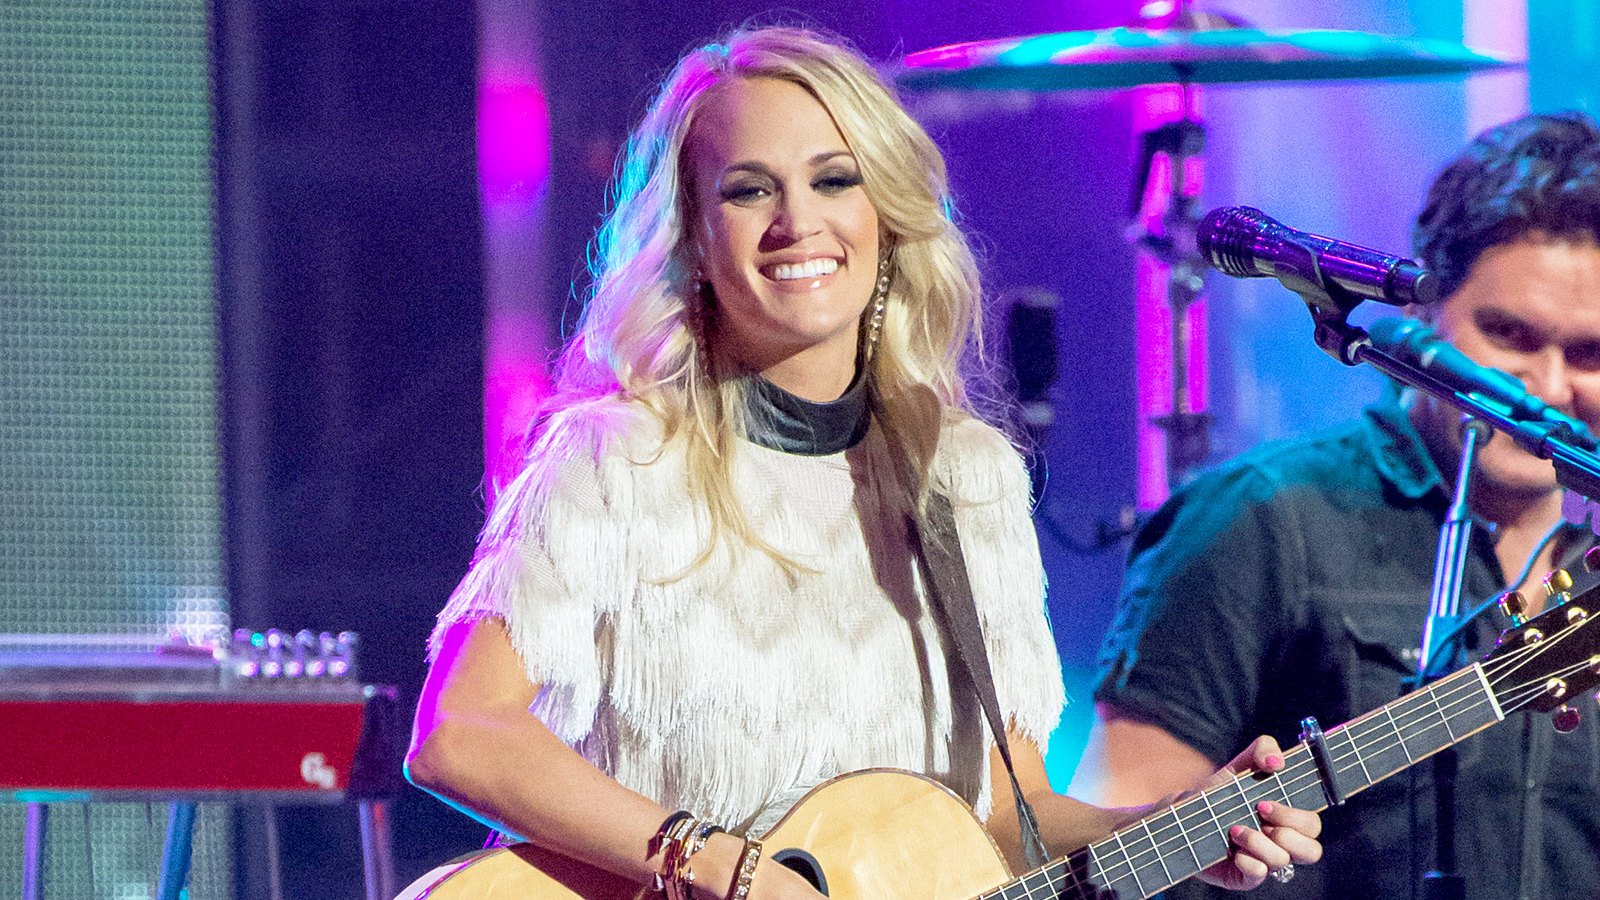 Carrie Underwood performs on 'Jimmy Kimmel Live' on October 27, 2015 in Los Angeles, California.